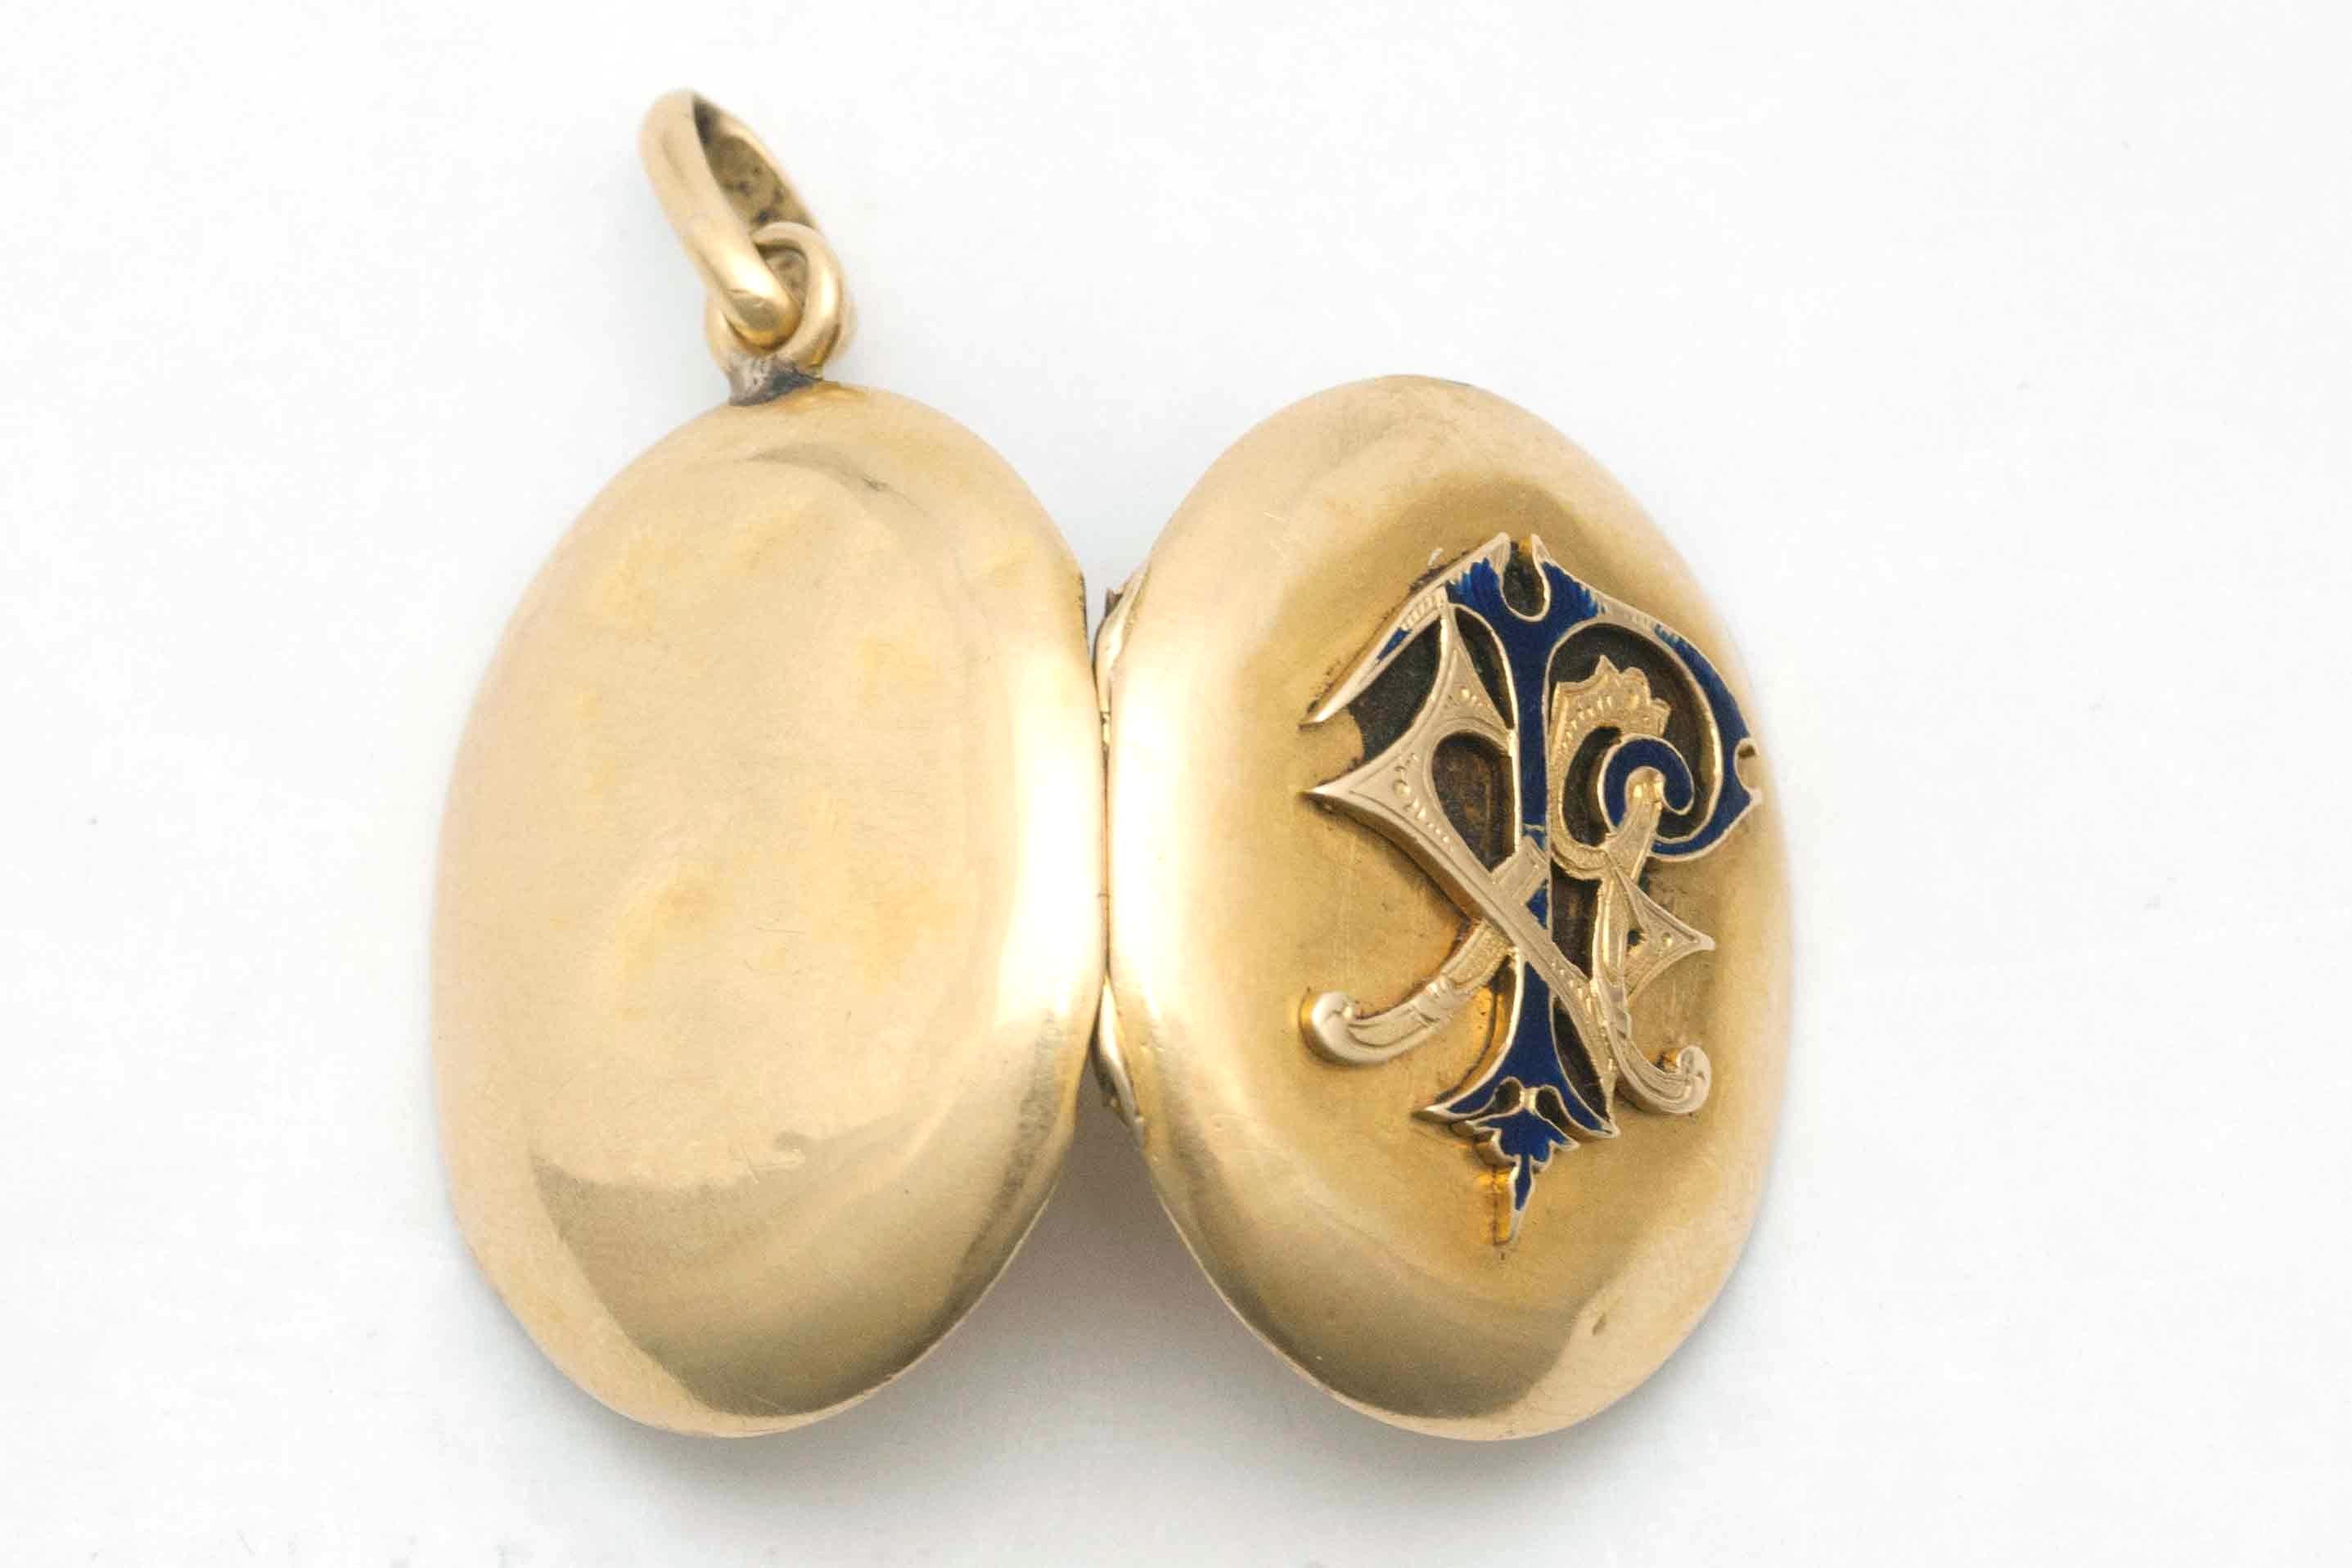 The Marion Locket. An antique Victorian memento to carry pictures of cherished ones. Circa 1910, finely tooled guilloche enamel monogram pendant in lovely solid 14K gold. This will be a family heirloom for many more generations to come.

Height